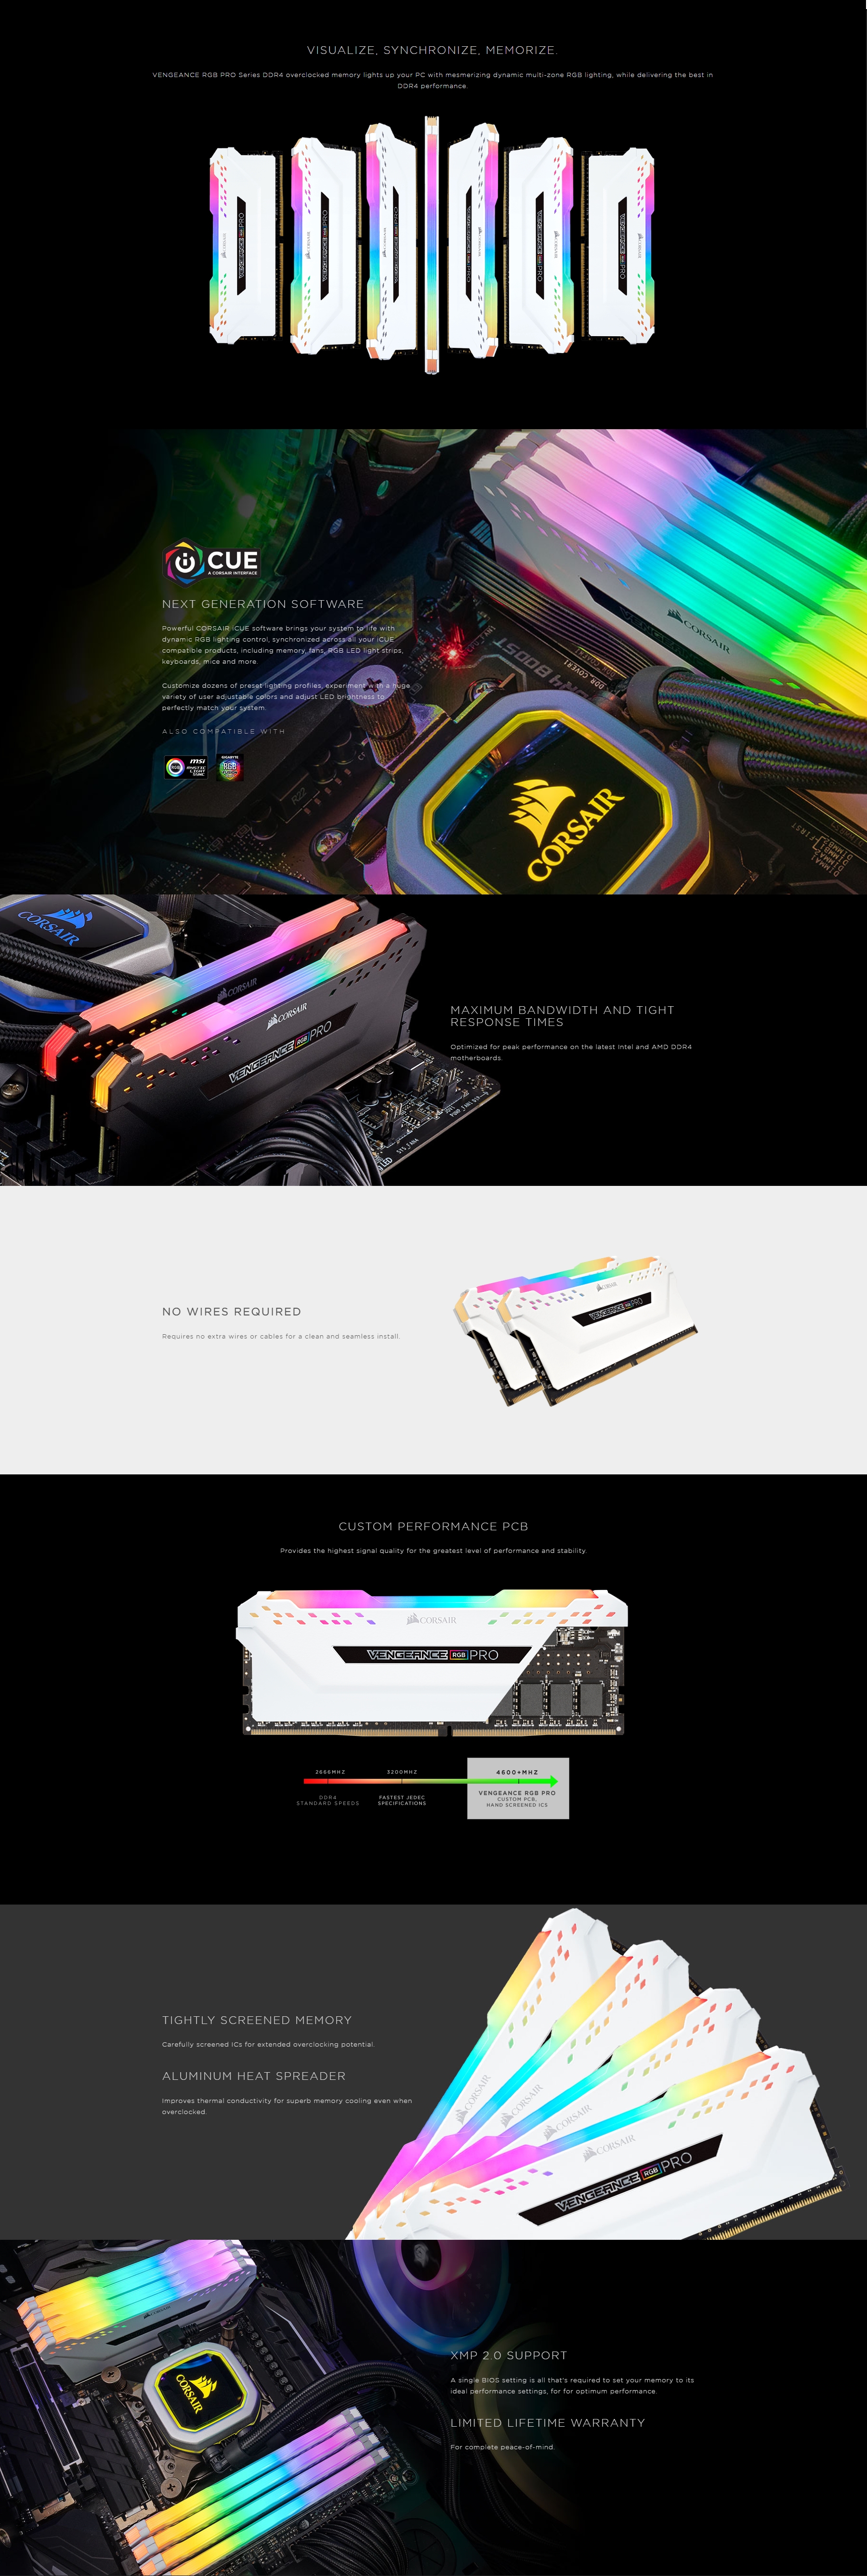 A large marketing image providing additional information about the product Corsair 16GB Kit (2x8GB) DDR4 Vengeance RGB Pro C15 3000MHz - White - Additional alt info not provided